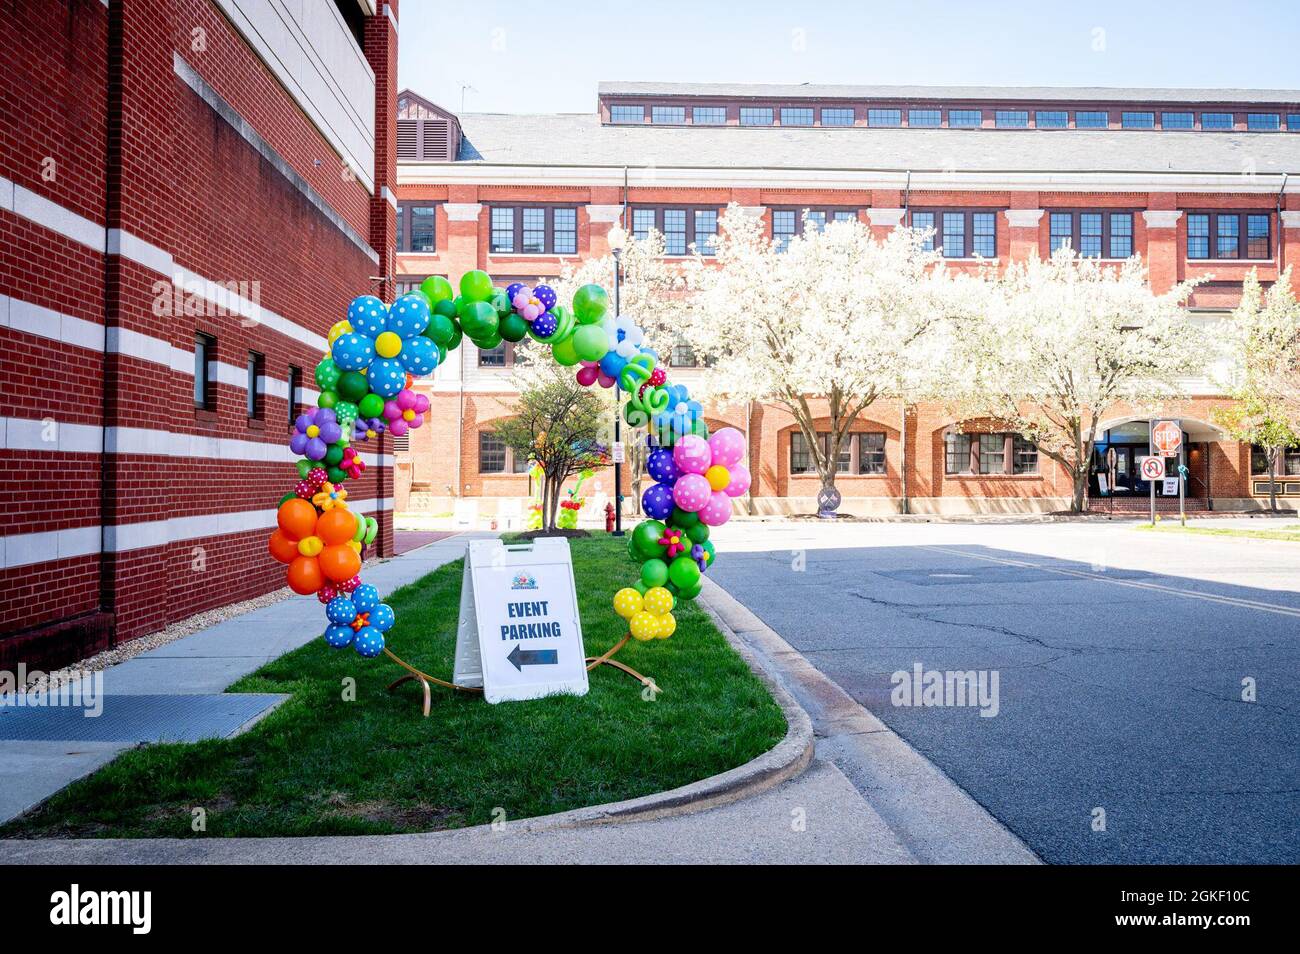 WASHINGTON, DC (April 3, 2021) – A balloon arch stands onboard Washington Navy Yard, welcoming participants to Eggstravaganza, a spring-themed event hosted by Fleet and Family Readiness. Stock Photo